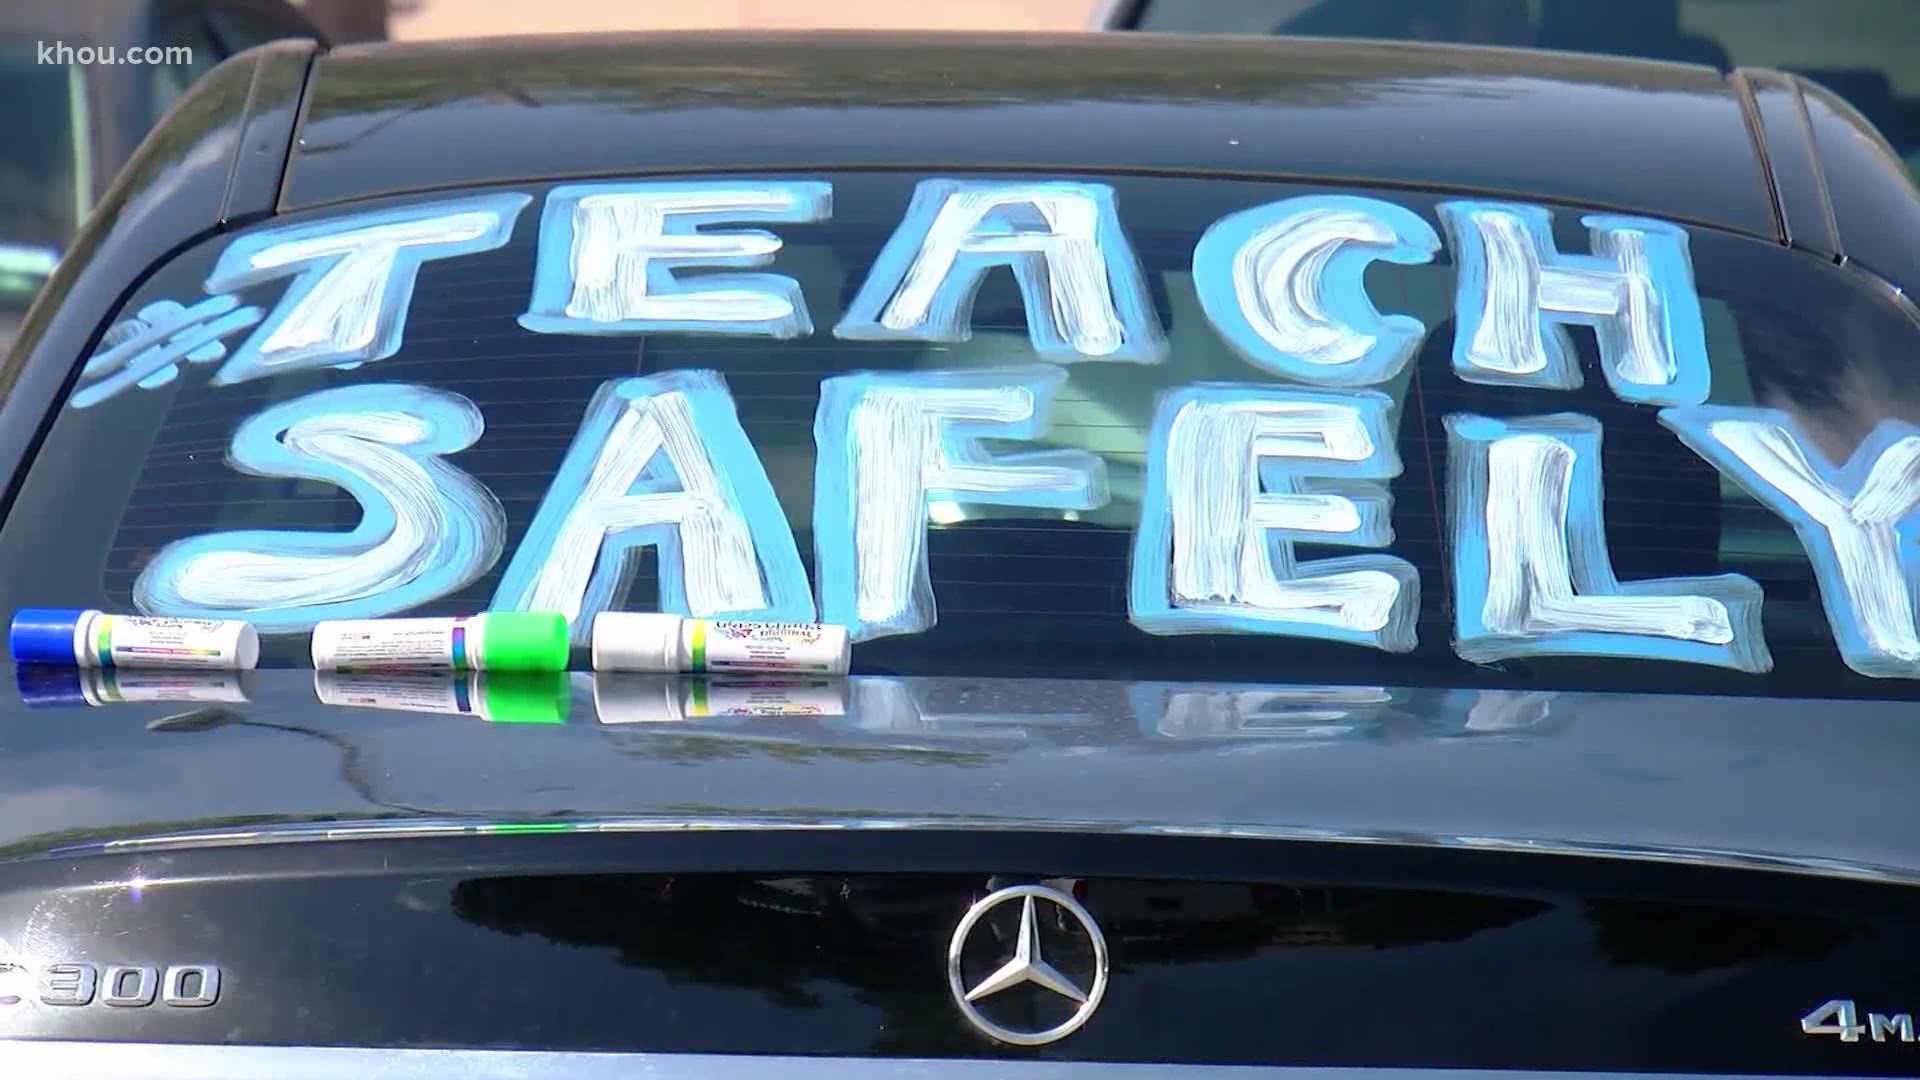 Texas teachers rallied in Austin Saturday in protest of returning to school campuses before adequate safety measures were in place to protect them from the COVID-19.